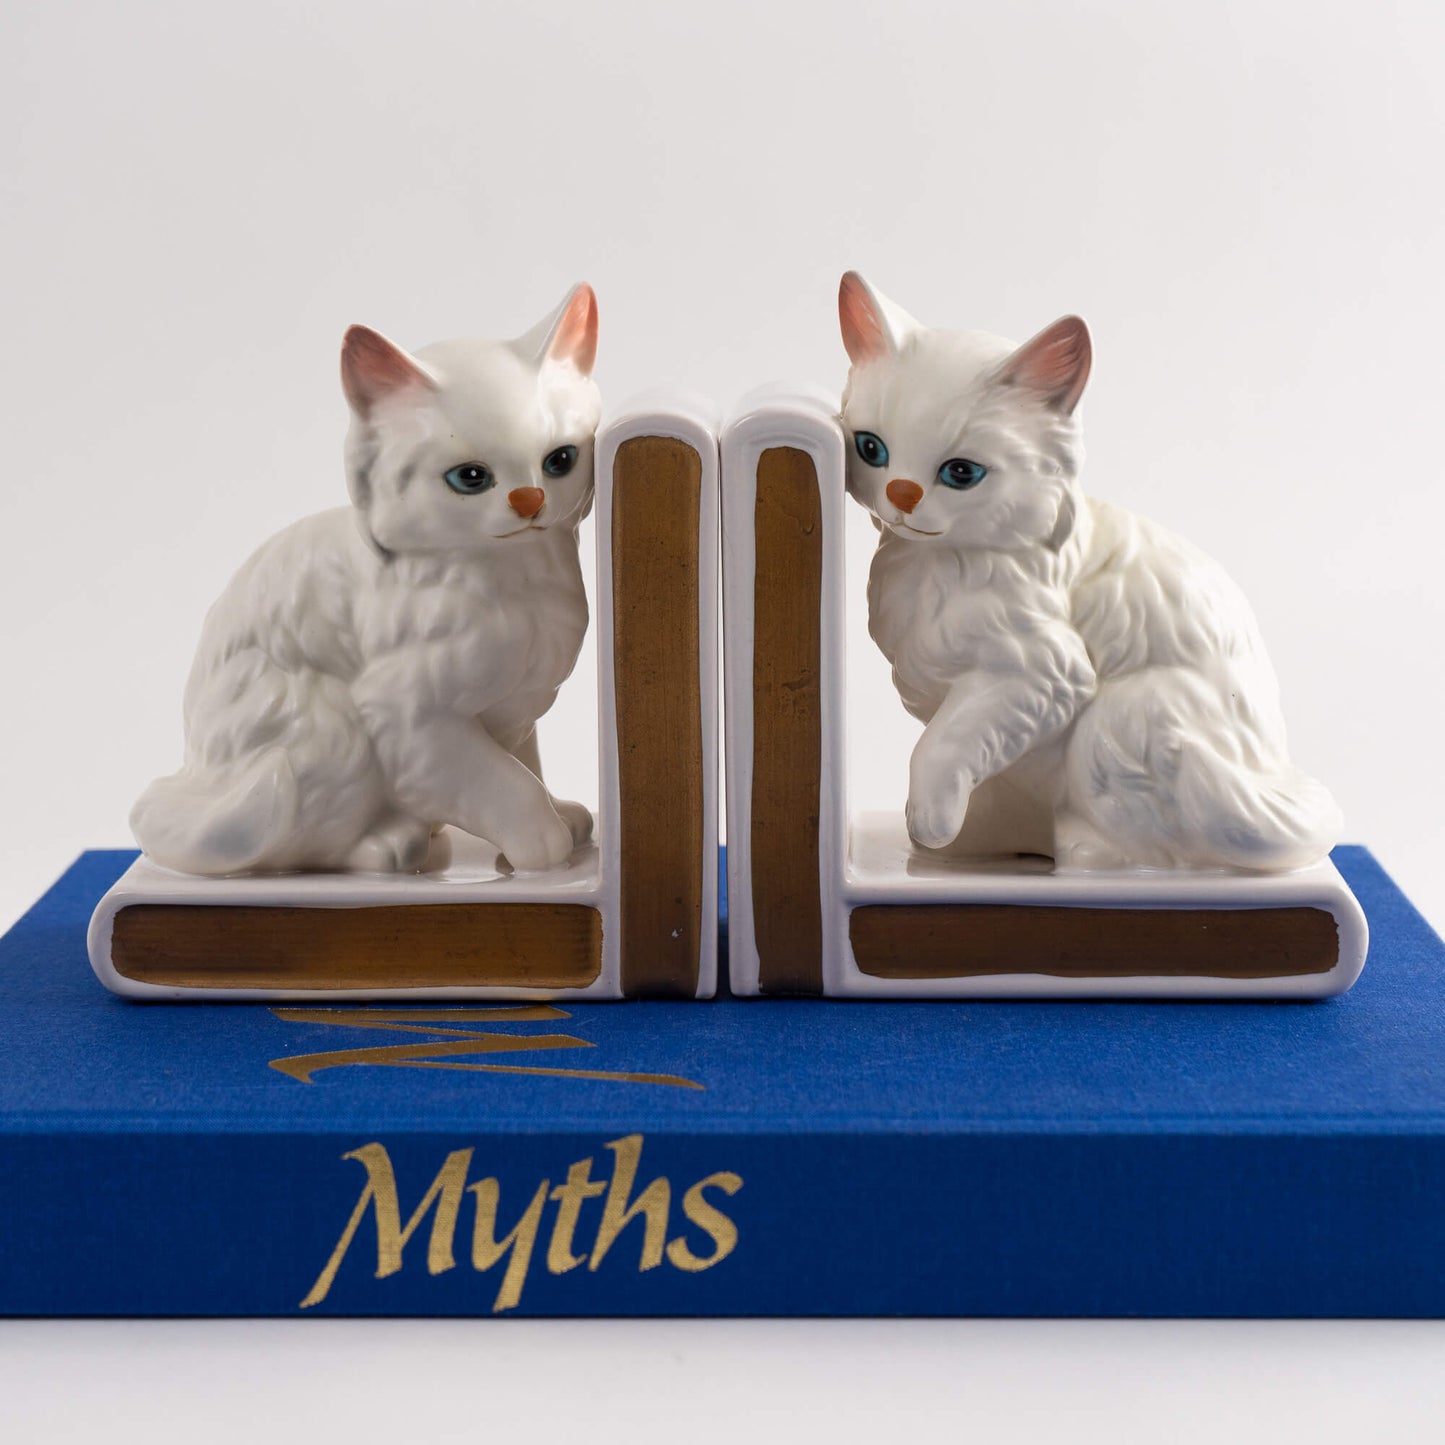 Vintage White Kitten Ceramic Bookends - A Pair